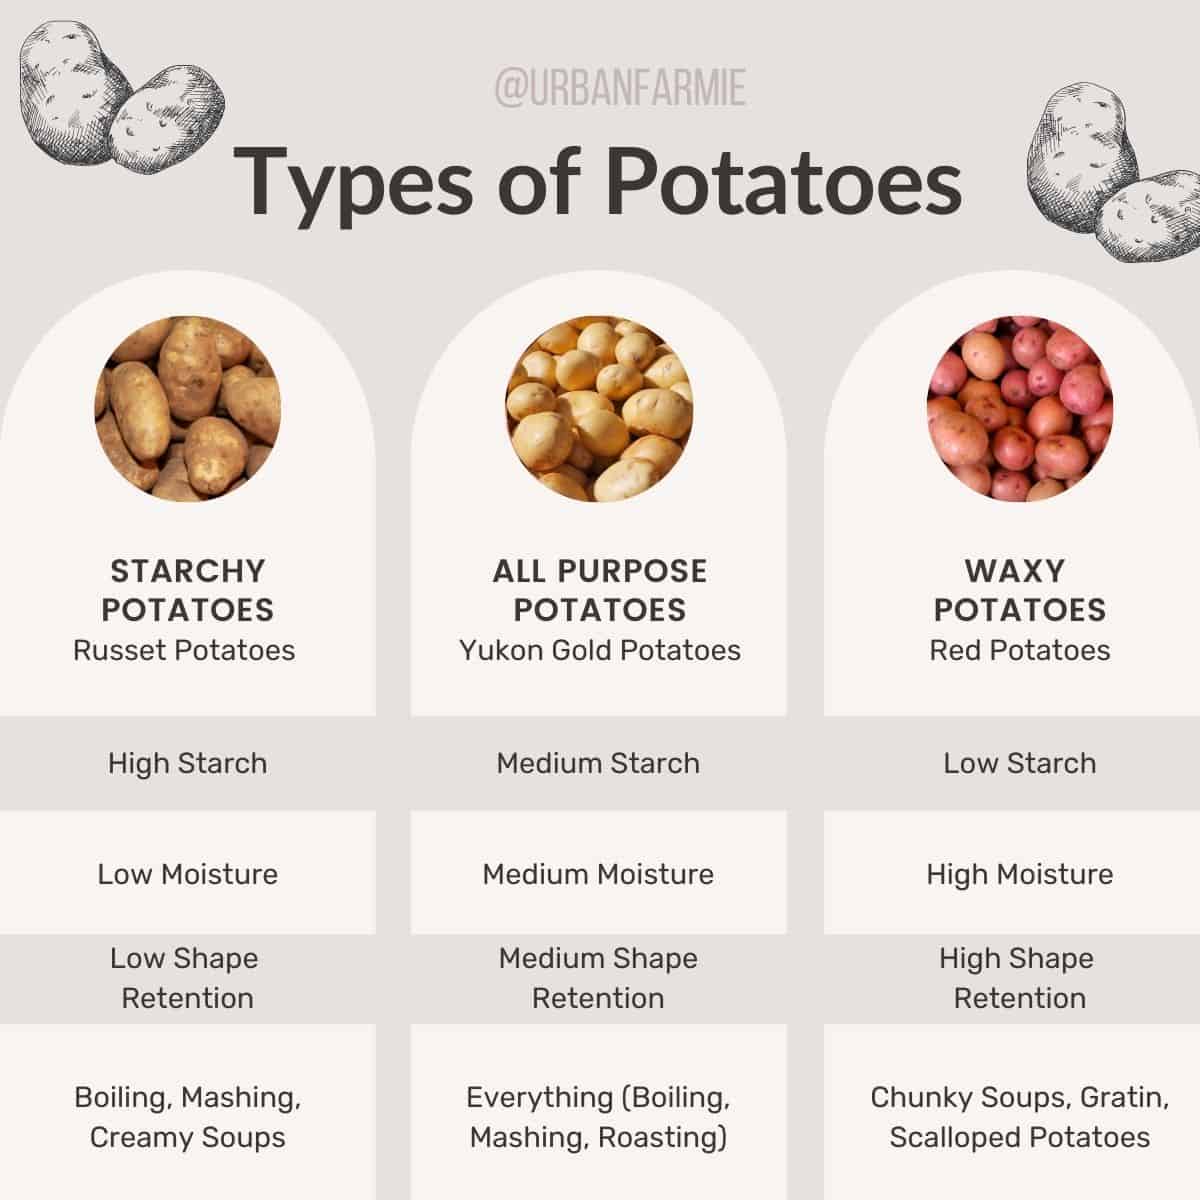 Three panel infographic highlighting differences in starchy, waxy and all purpose potatoes - check post for details